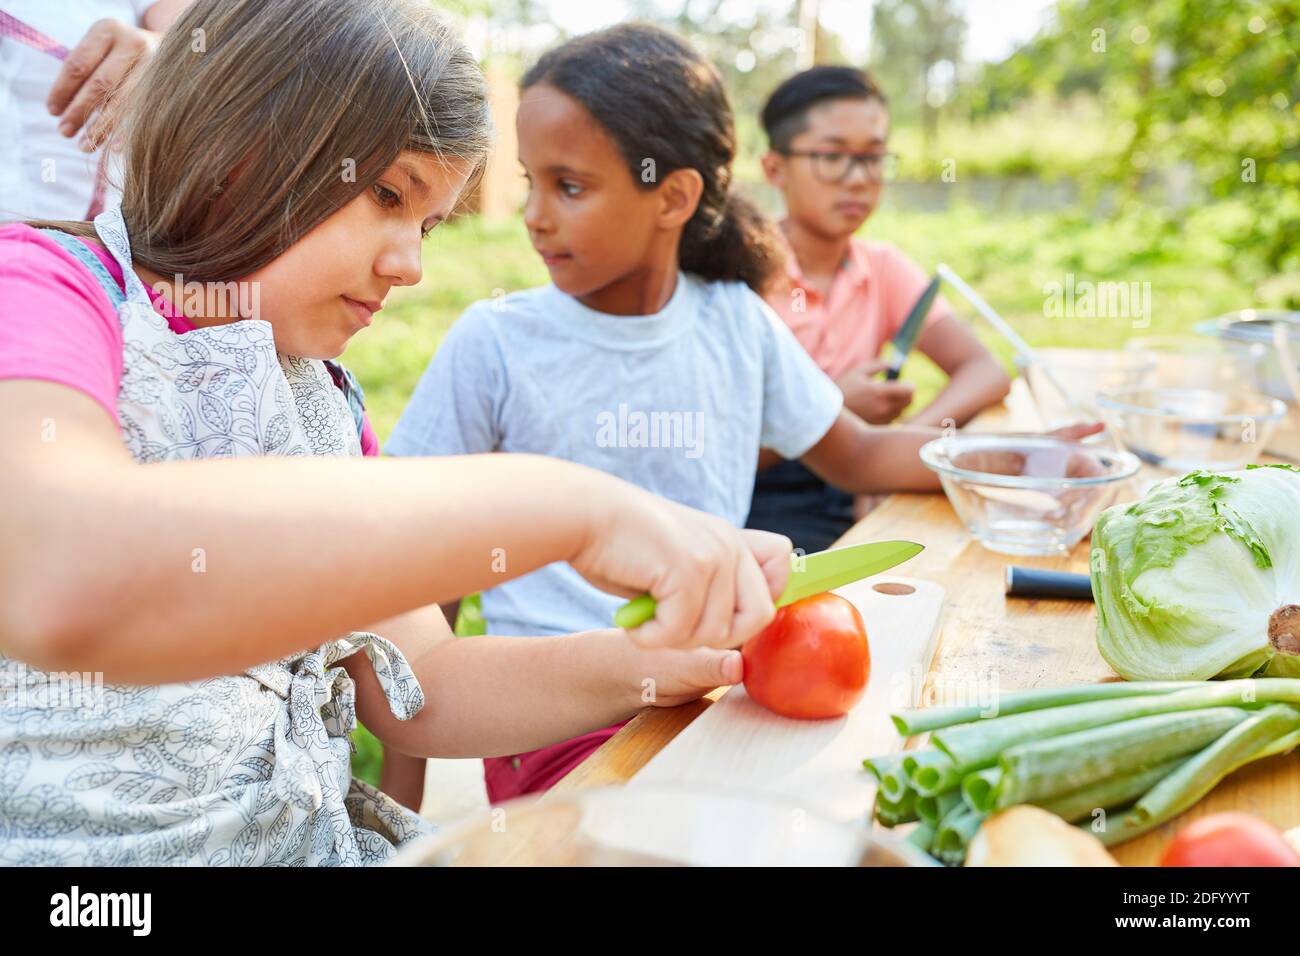 Children at summer camp cooking class prepare salad and learn about healthy eating Stock Photo